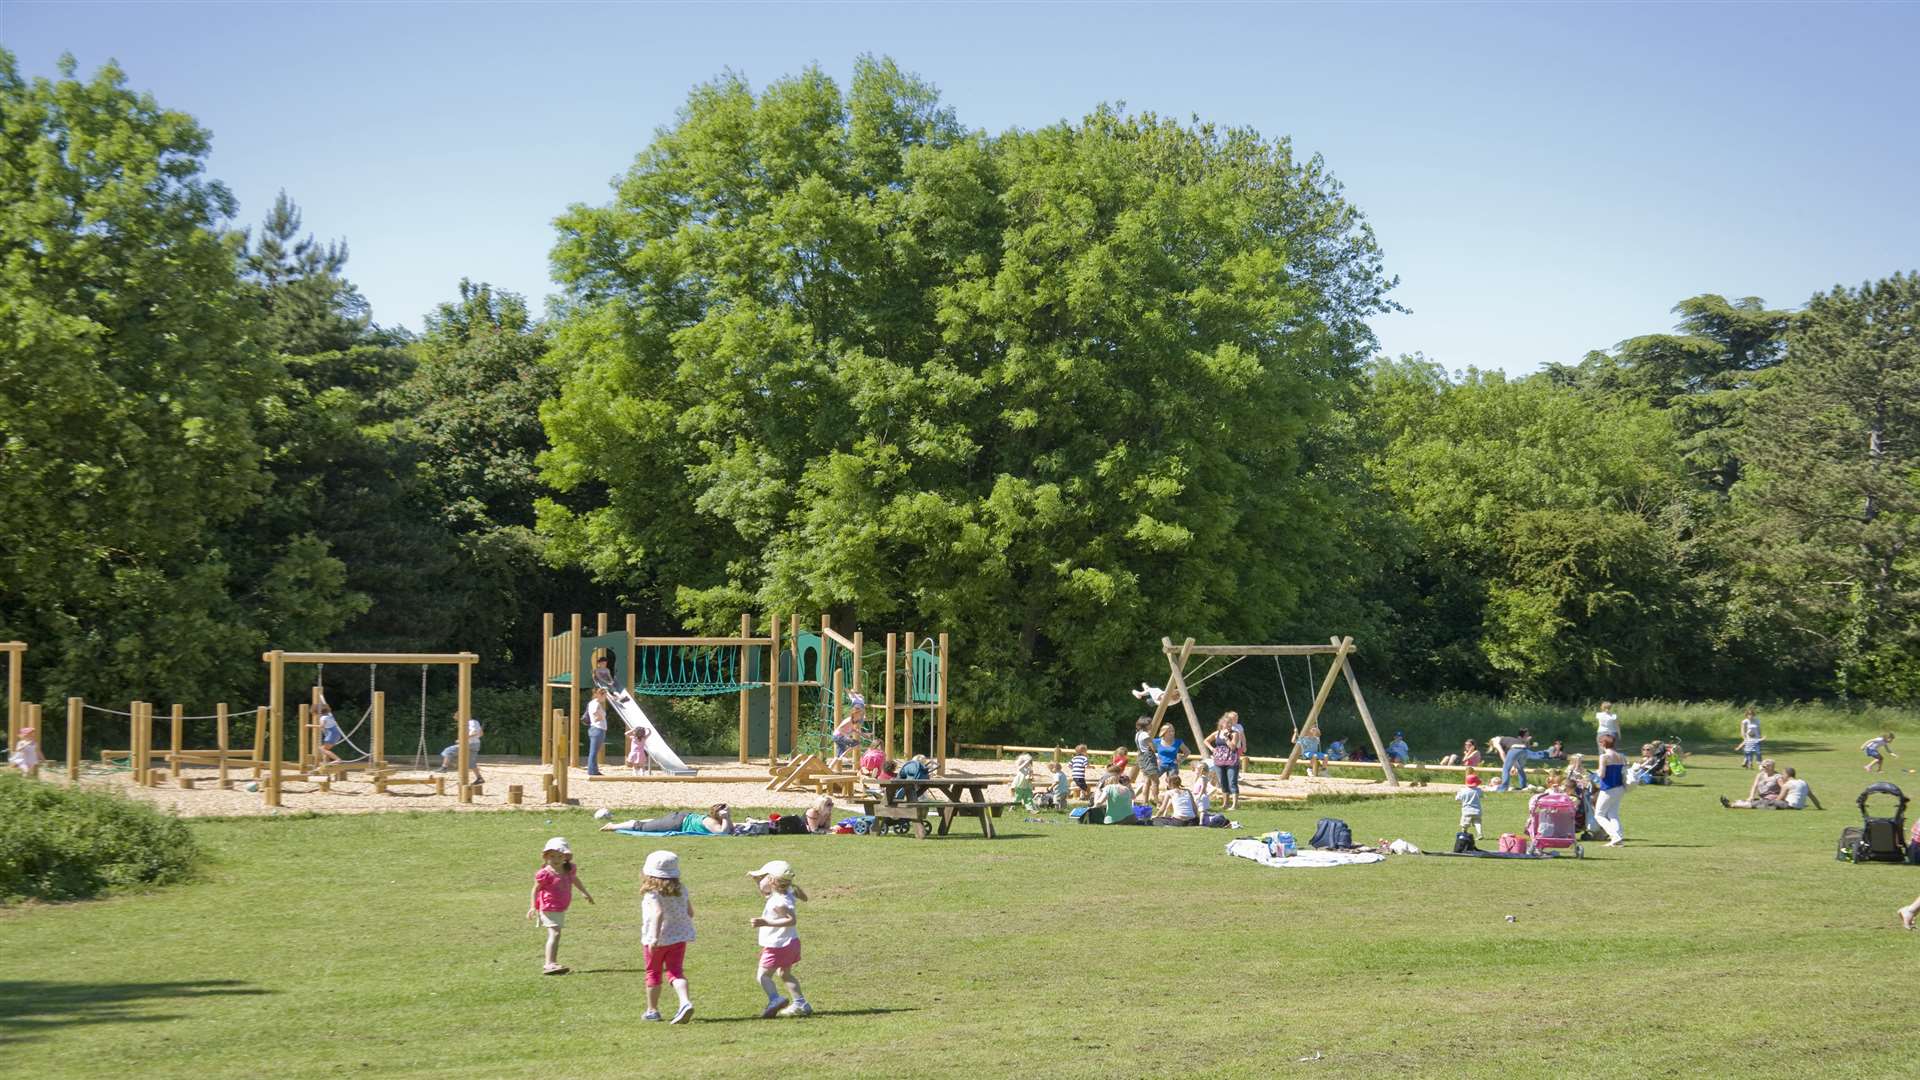 Manor Park is a great play for the kids to explore